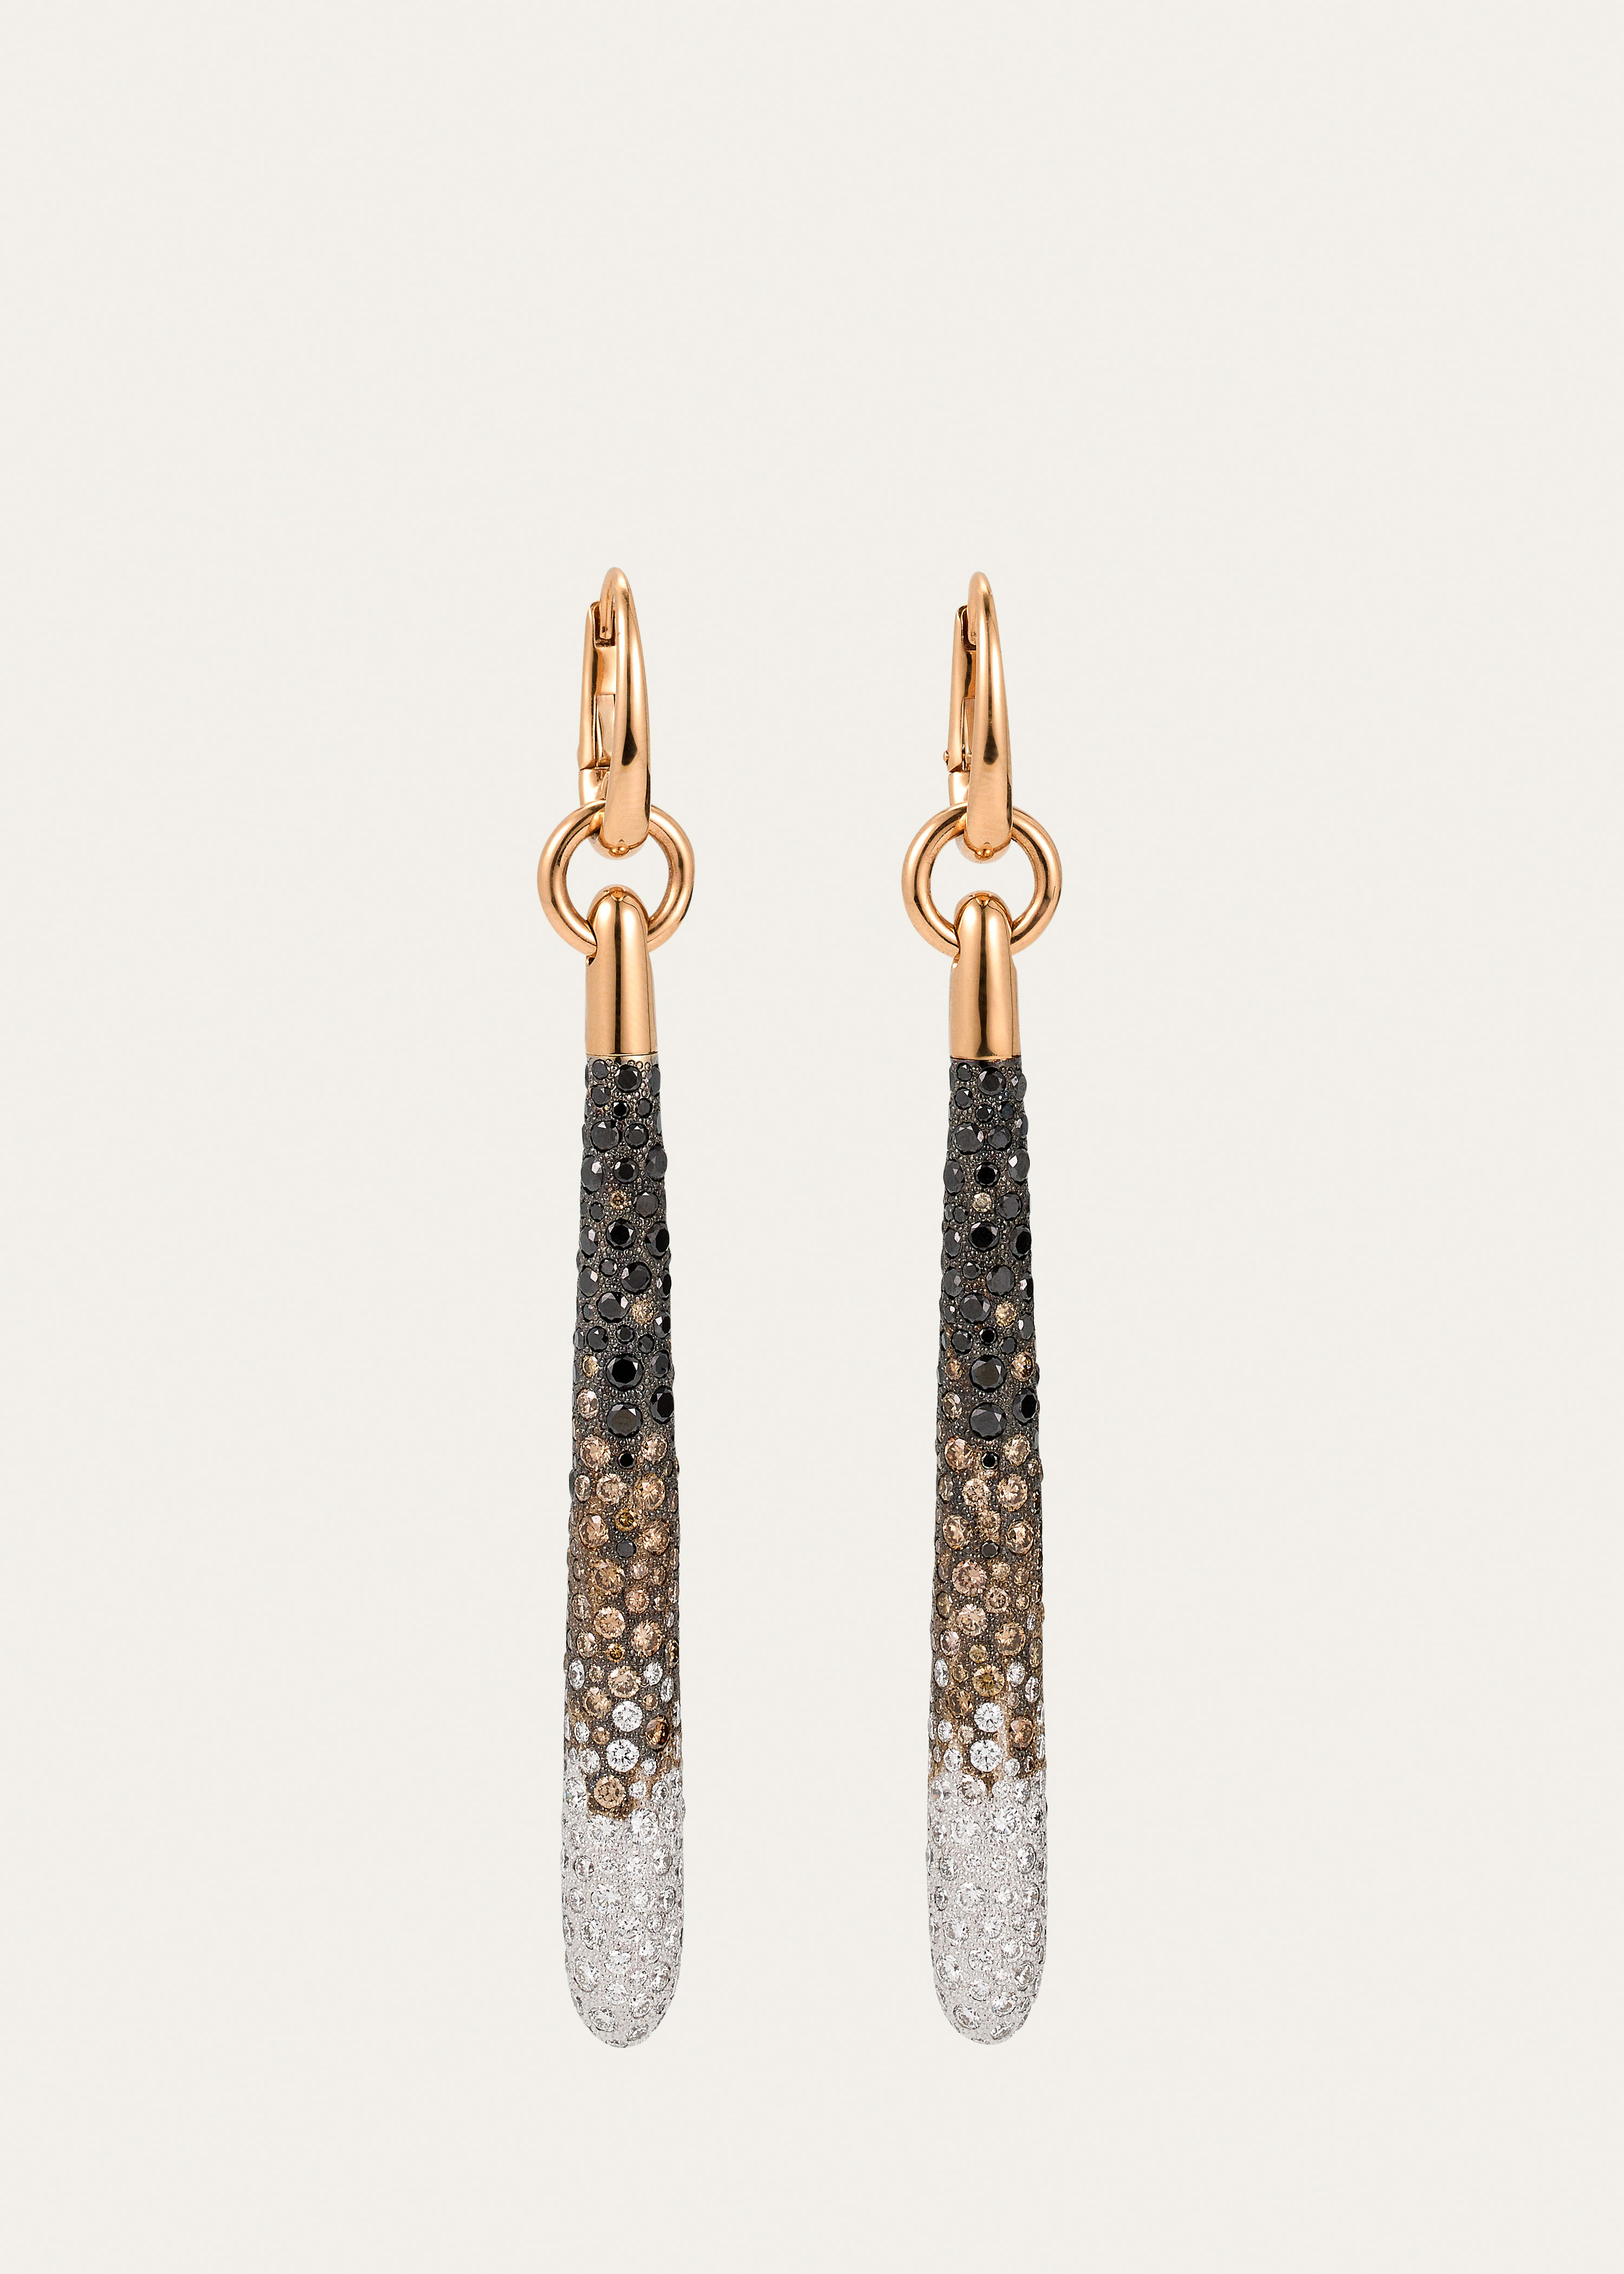 POMELLATO 18K ROSE GOLD SABBIA EARRINGS WITH WHITE, BROWN AND BLACK DIAMONDS